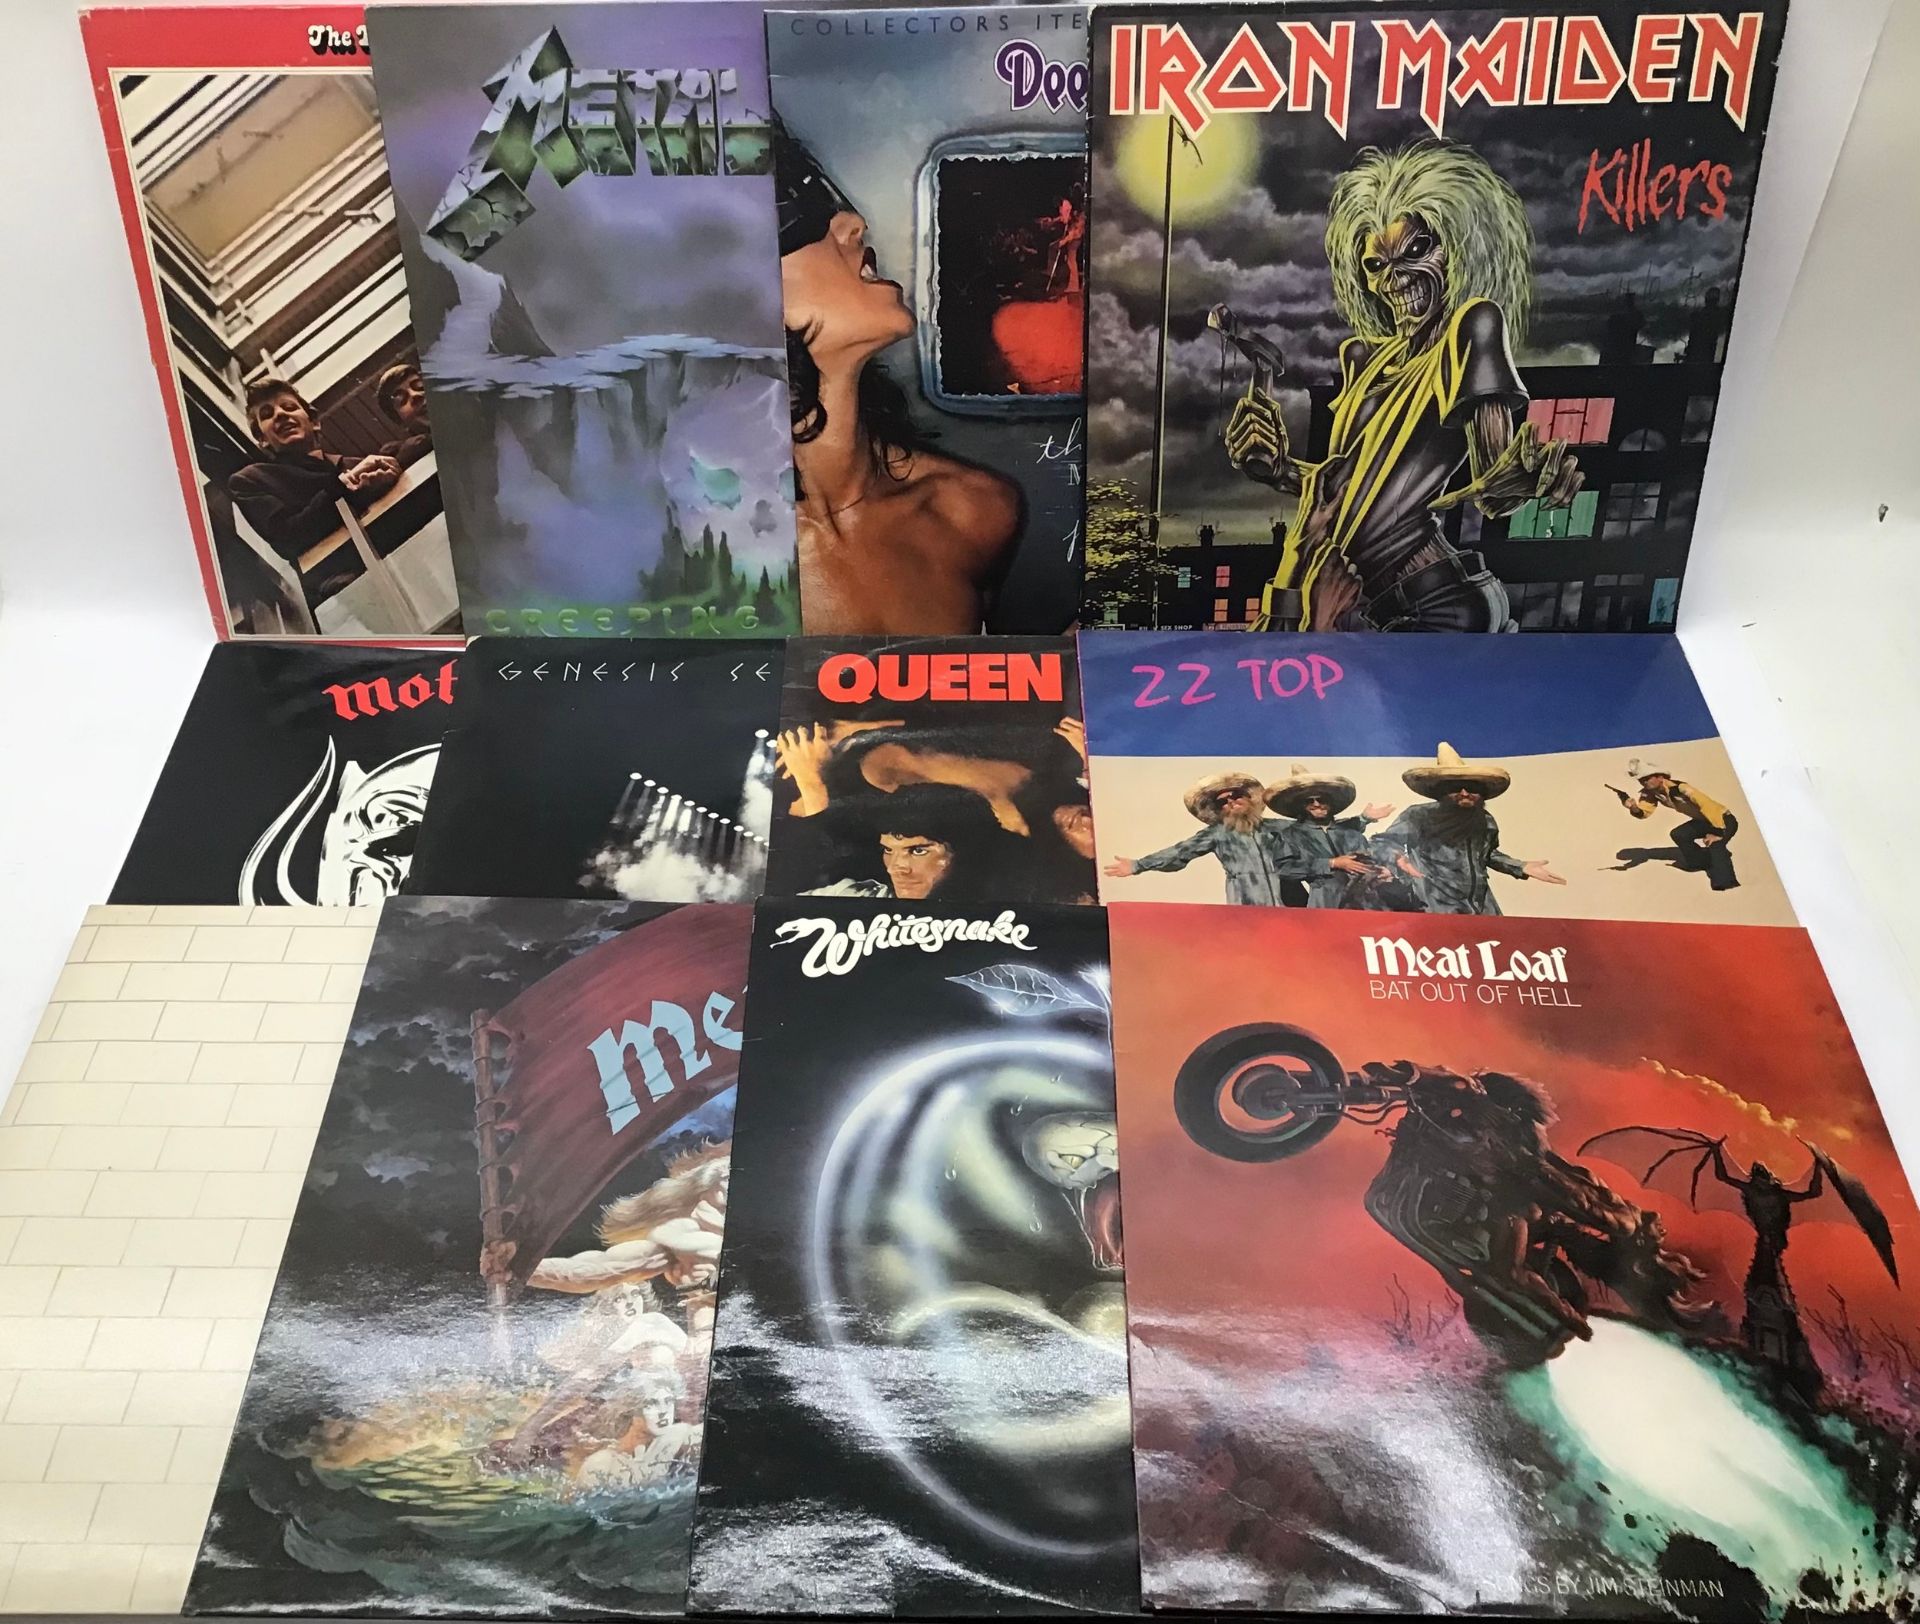 12 ROCK RELATED VINYL LP RECORDS. To include artists - Pink Floyd - Iron Maiden - Meatloaf x 2 -